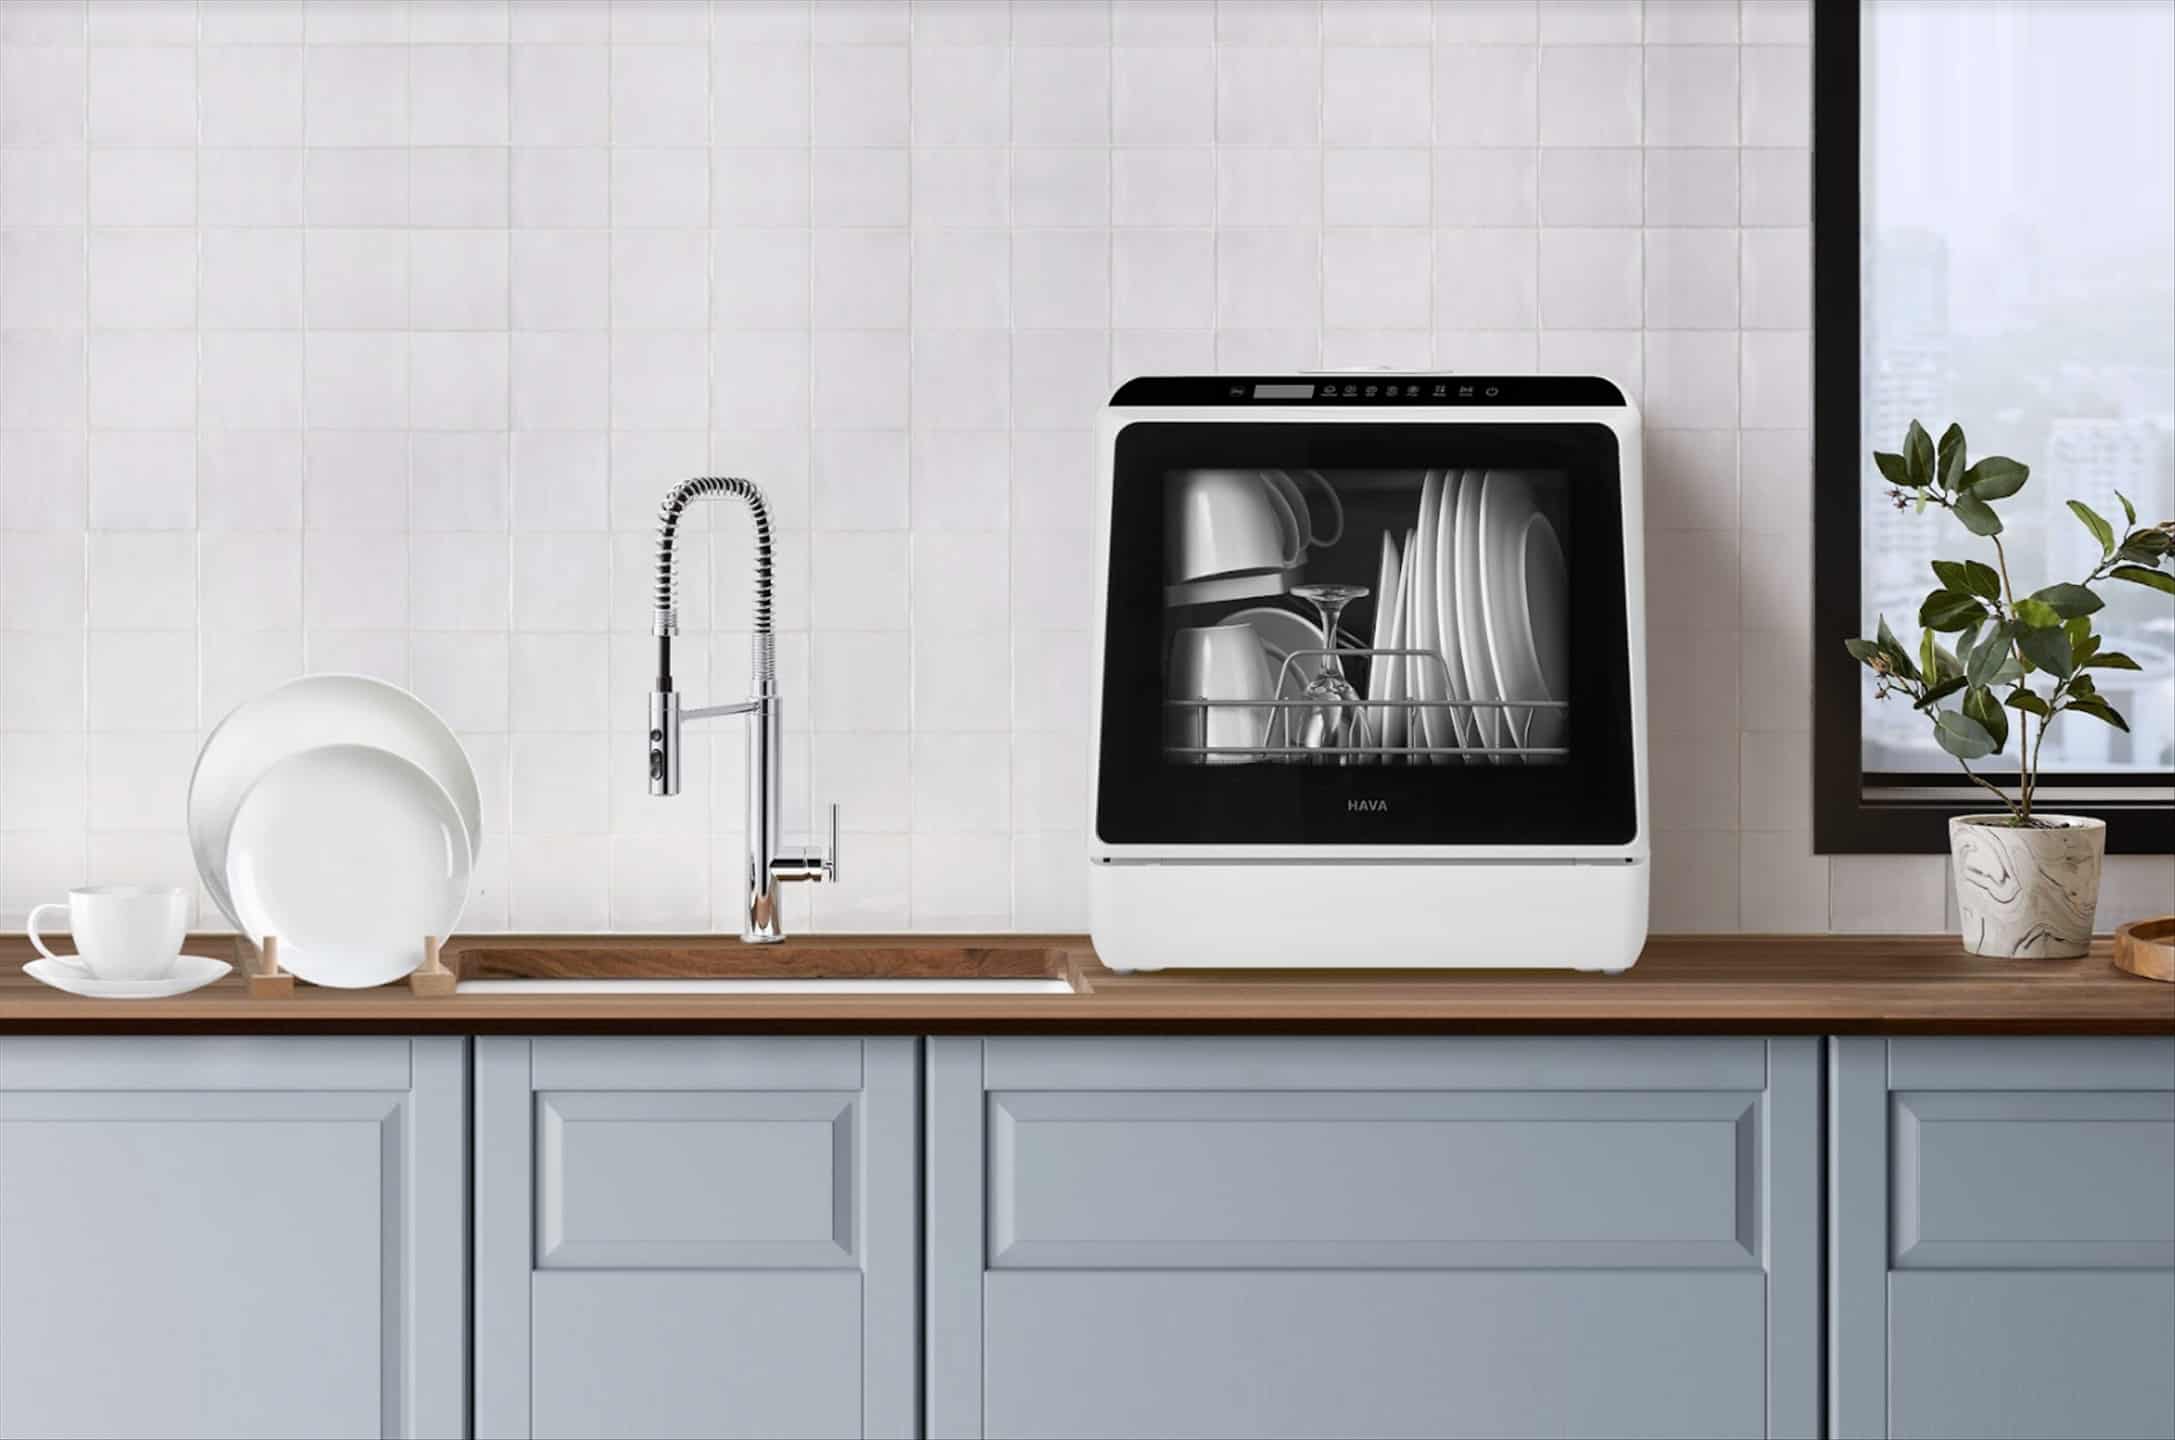 Is this the smallest dishwasher ever? It’s also compact and portable!